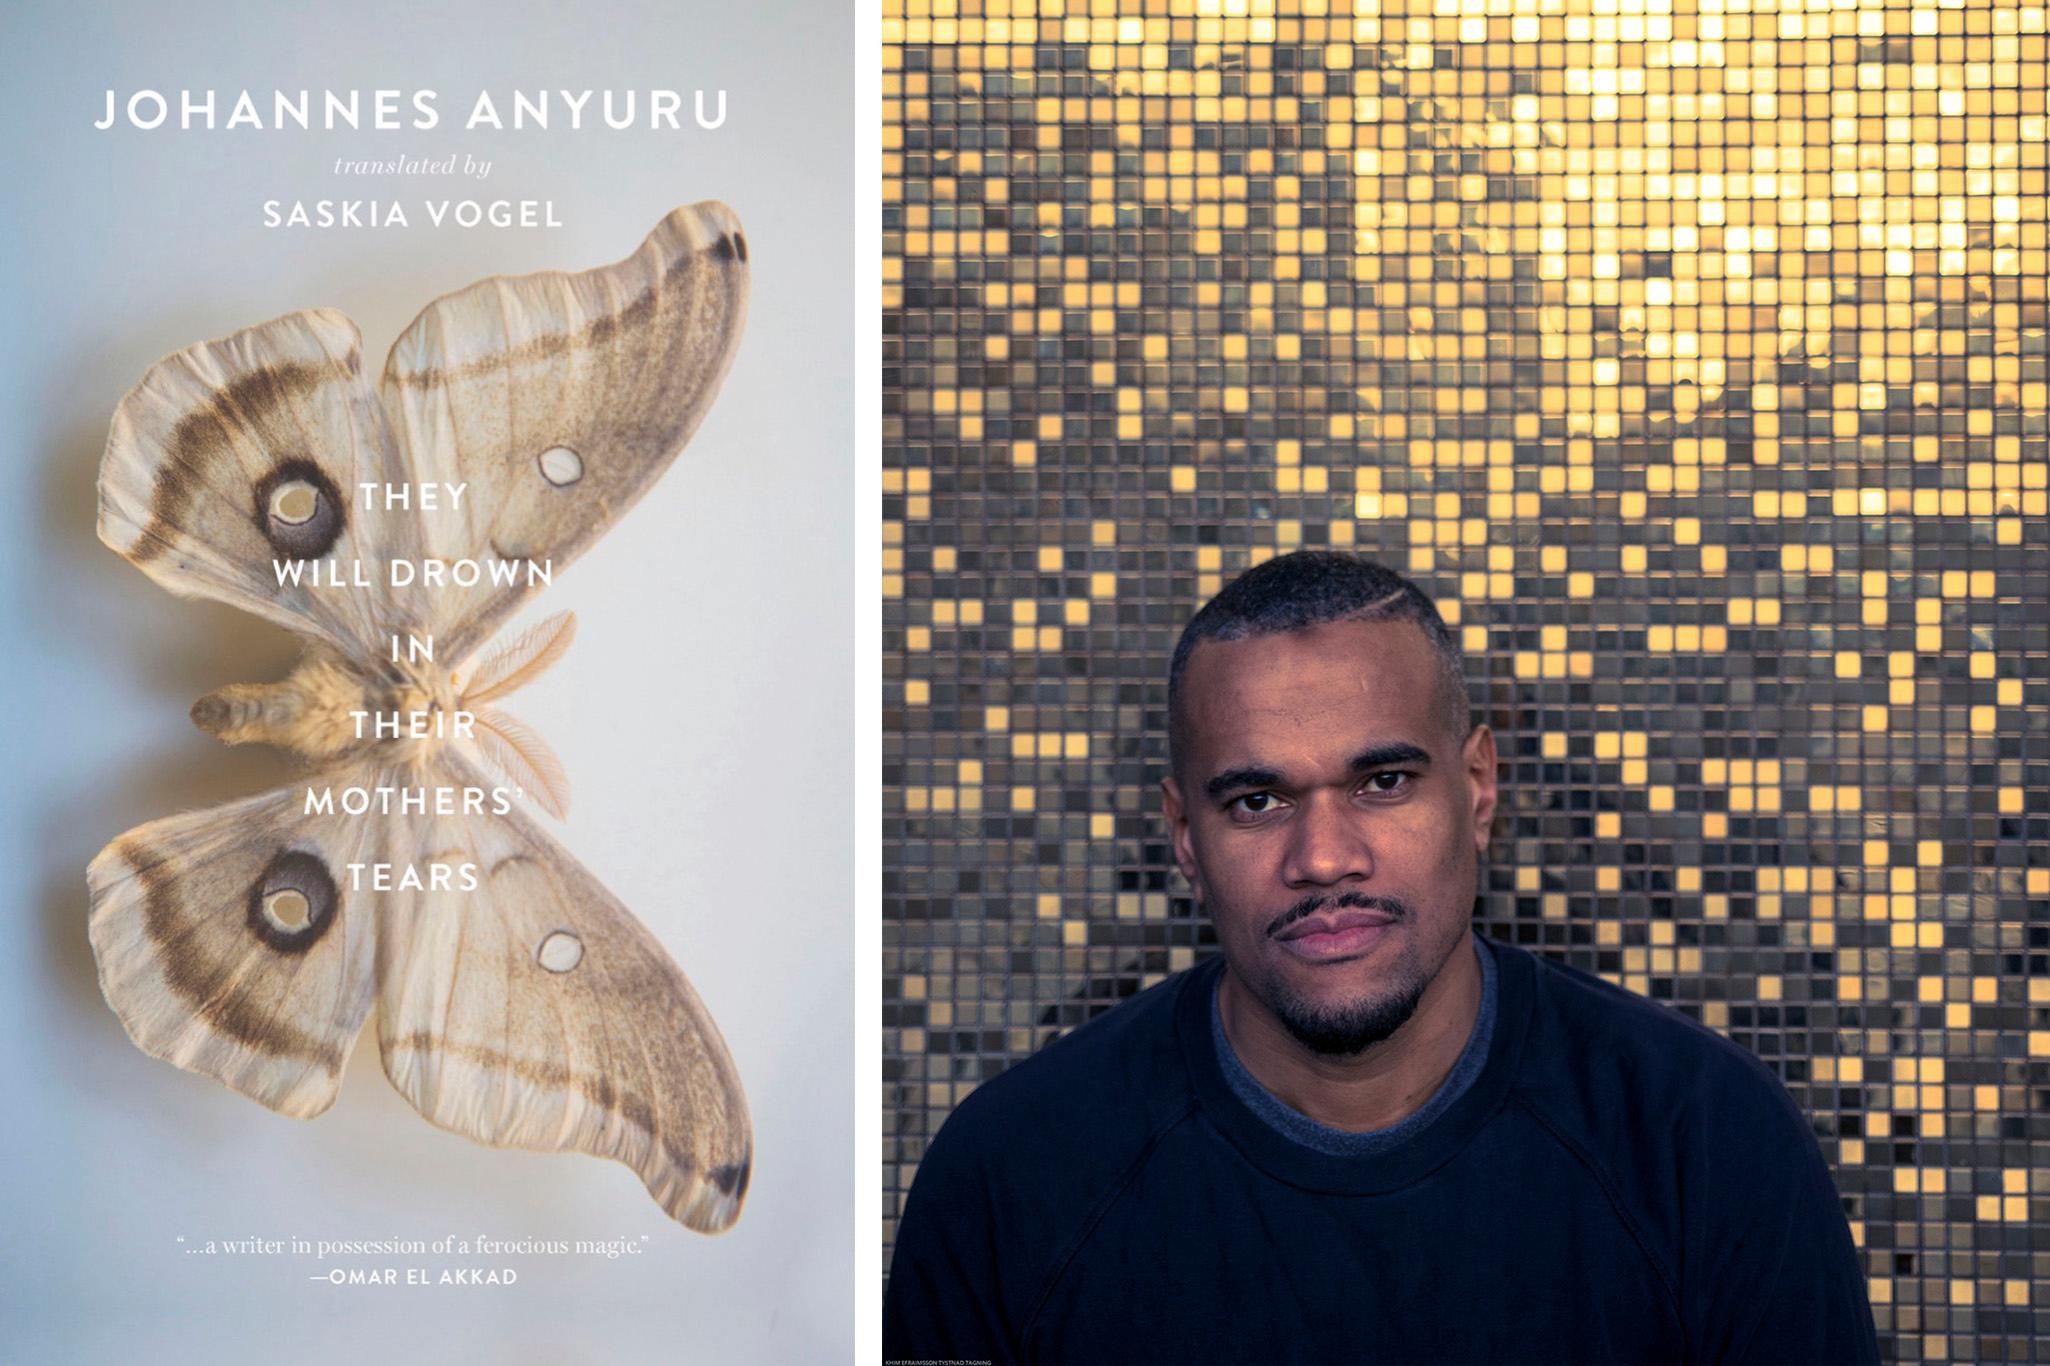 Left: A cover of the book They Will Drown in Their Mothers’ Tears, with a big photo of a beige moth and the title on. Right: A portrait photo of Johannes Anyuru, a man with short dark hair and a black sweater against a wall with gold mosaic.